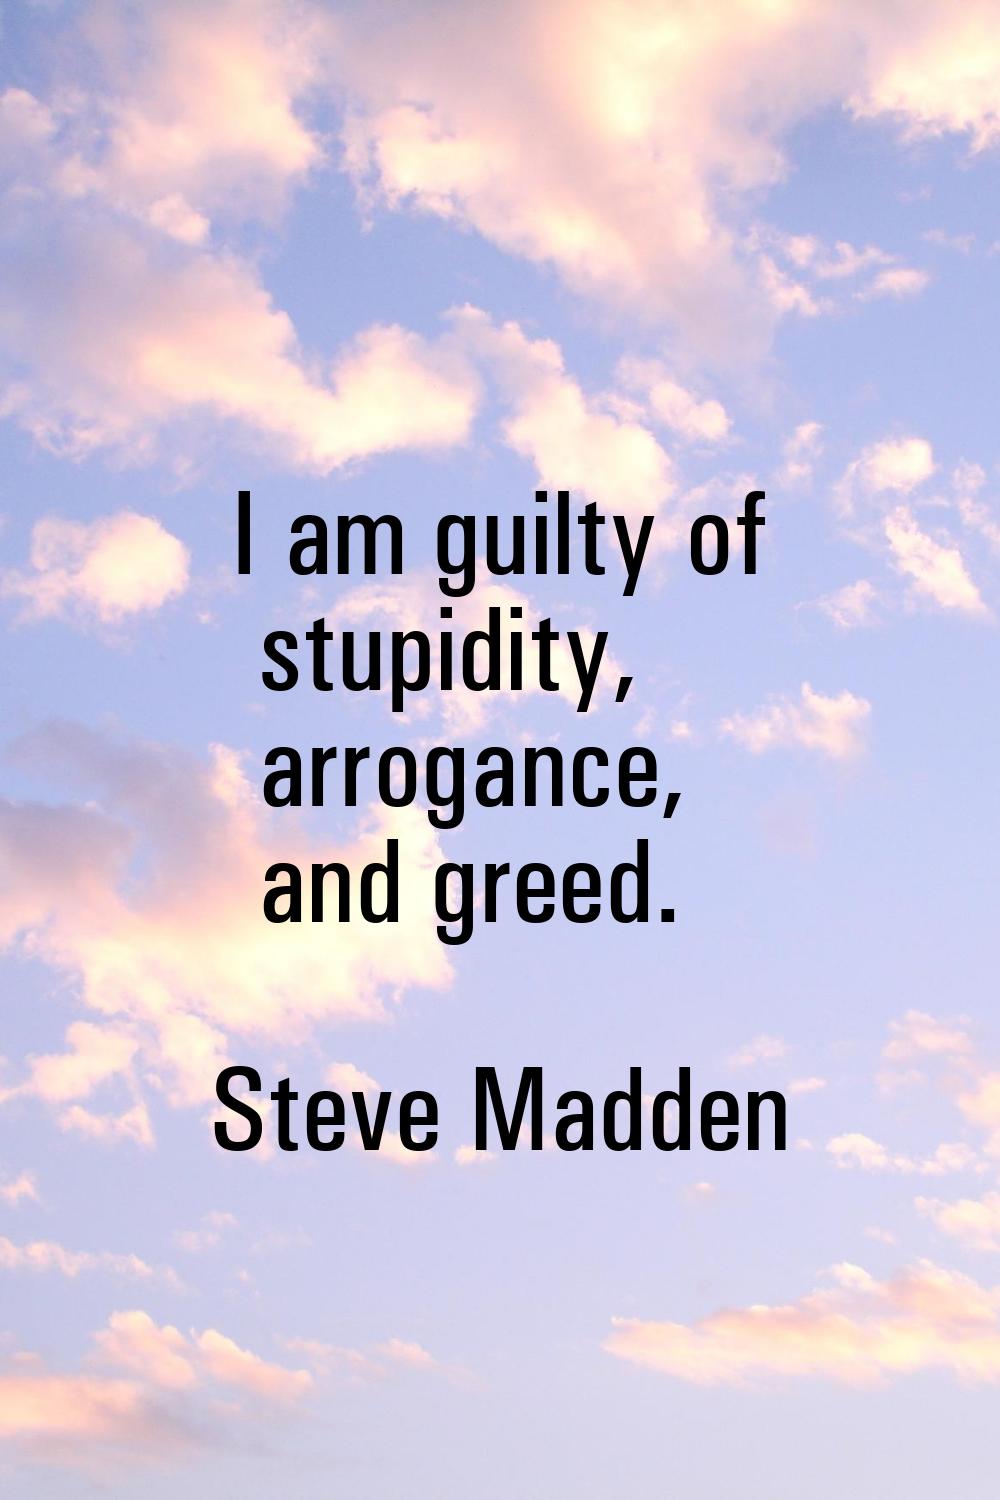 I am guilty of stupidity, arrogance, and greed.